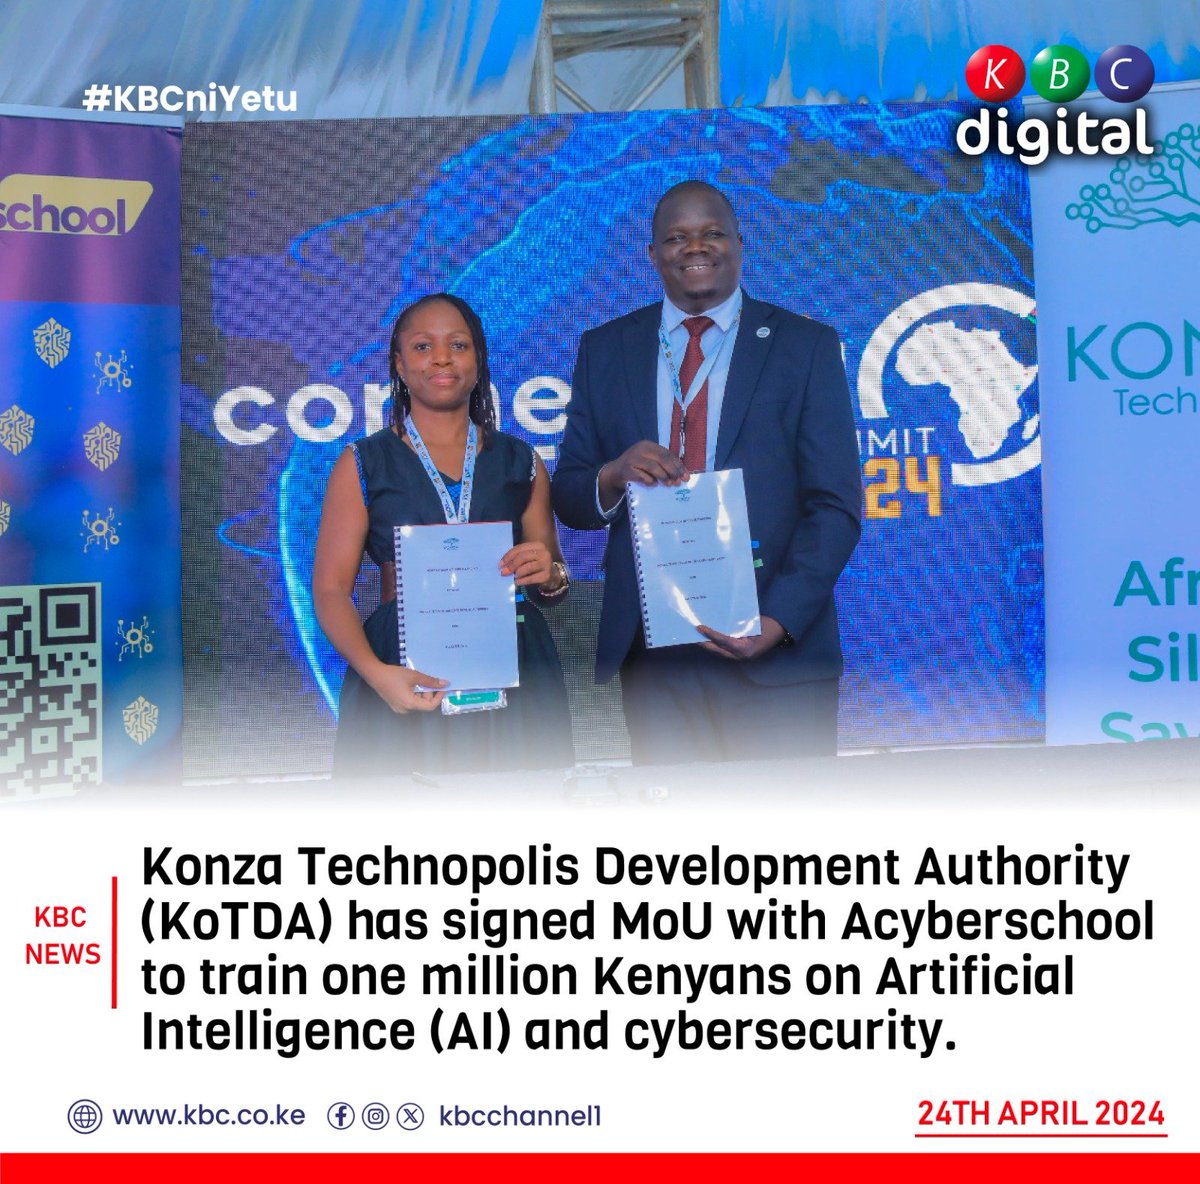 Exciting news as Konza Technopolis Development Authority (@KonzaTech) partners with Acyberschool to empower one million Kenyans with cutting-edge skills in Artificial Intelligence (AI) and cybersecurity through a groundbreaking MoU.